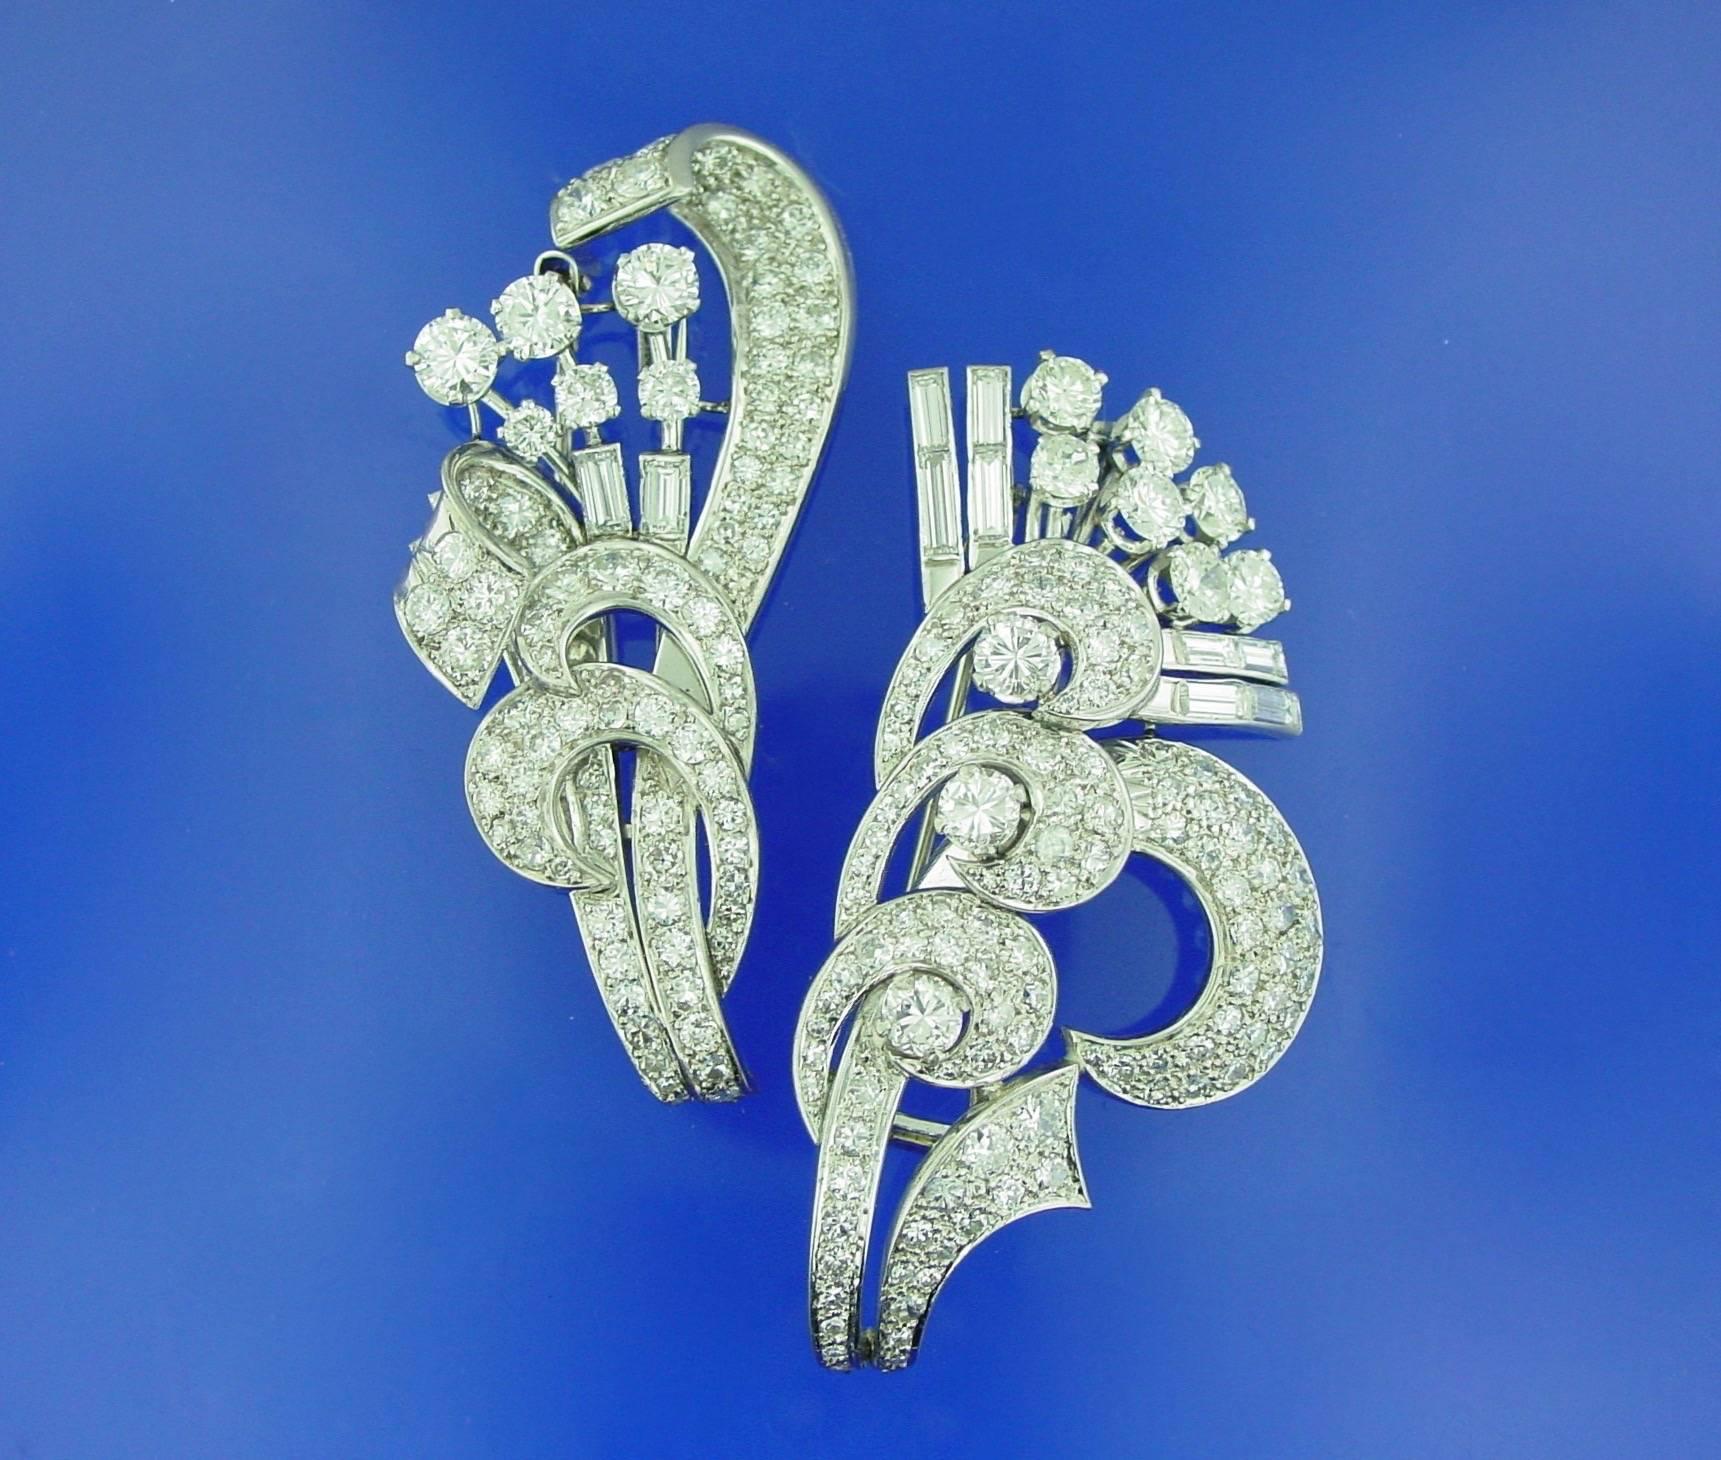 A lovely and versatile diamond brooch mounted in platinum. The pair of curvilinear brooches are joined together by a detachable frame and are equally beautiful when worn separately. Each brooch is set with round and baguette shaped diamonds with a